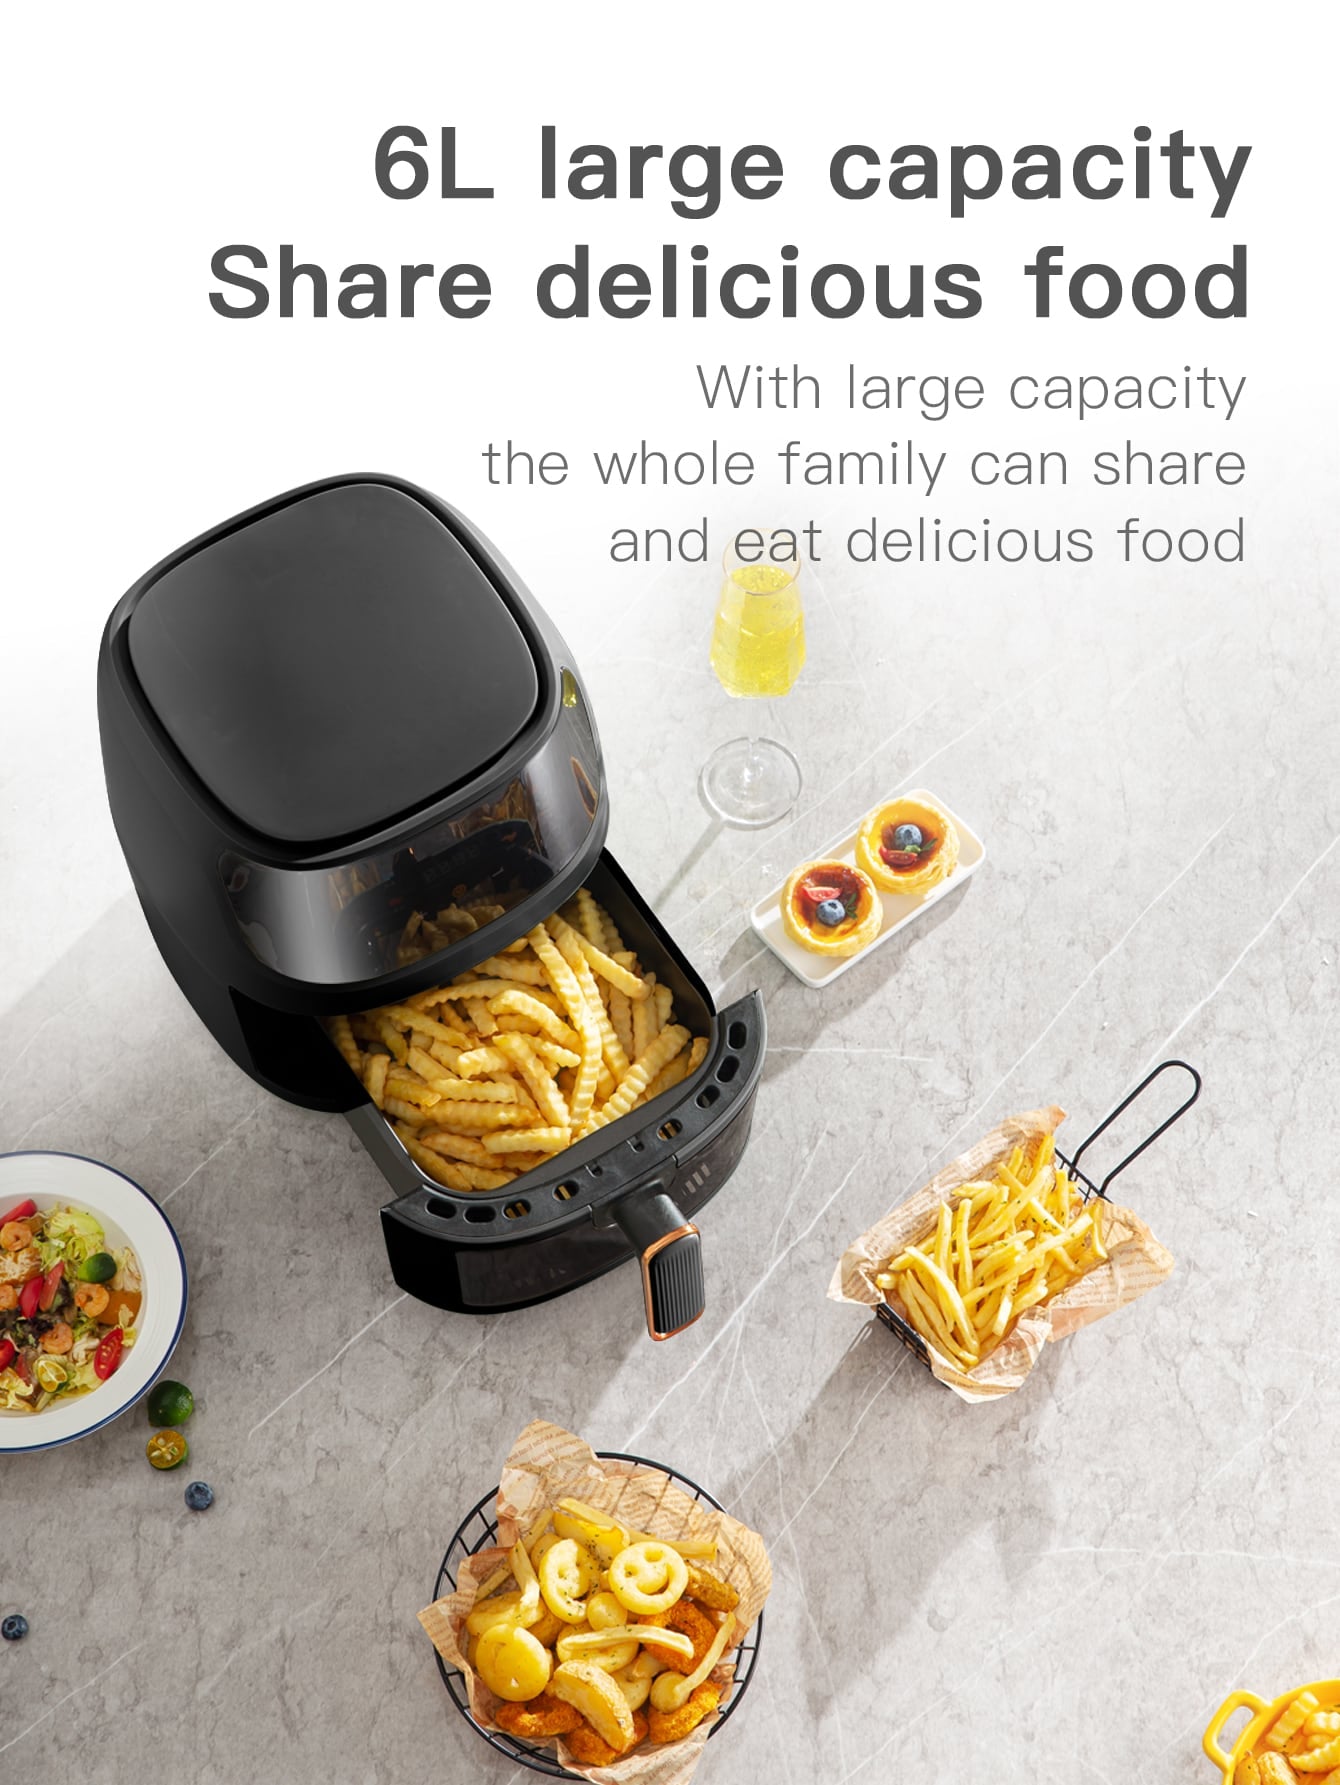 1pc Desktop Electric 6l Large Capacity Multi-functional Visible Air Fryer Qf-606 With Color Touch Screen, Suitable For Party Chicken Wings, Fries, Steak, For Home Cooking-Black-4